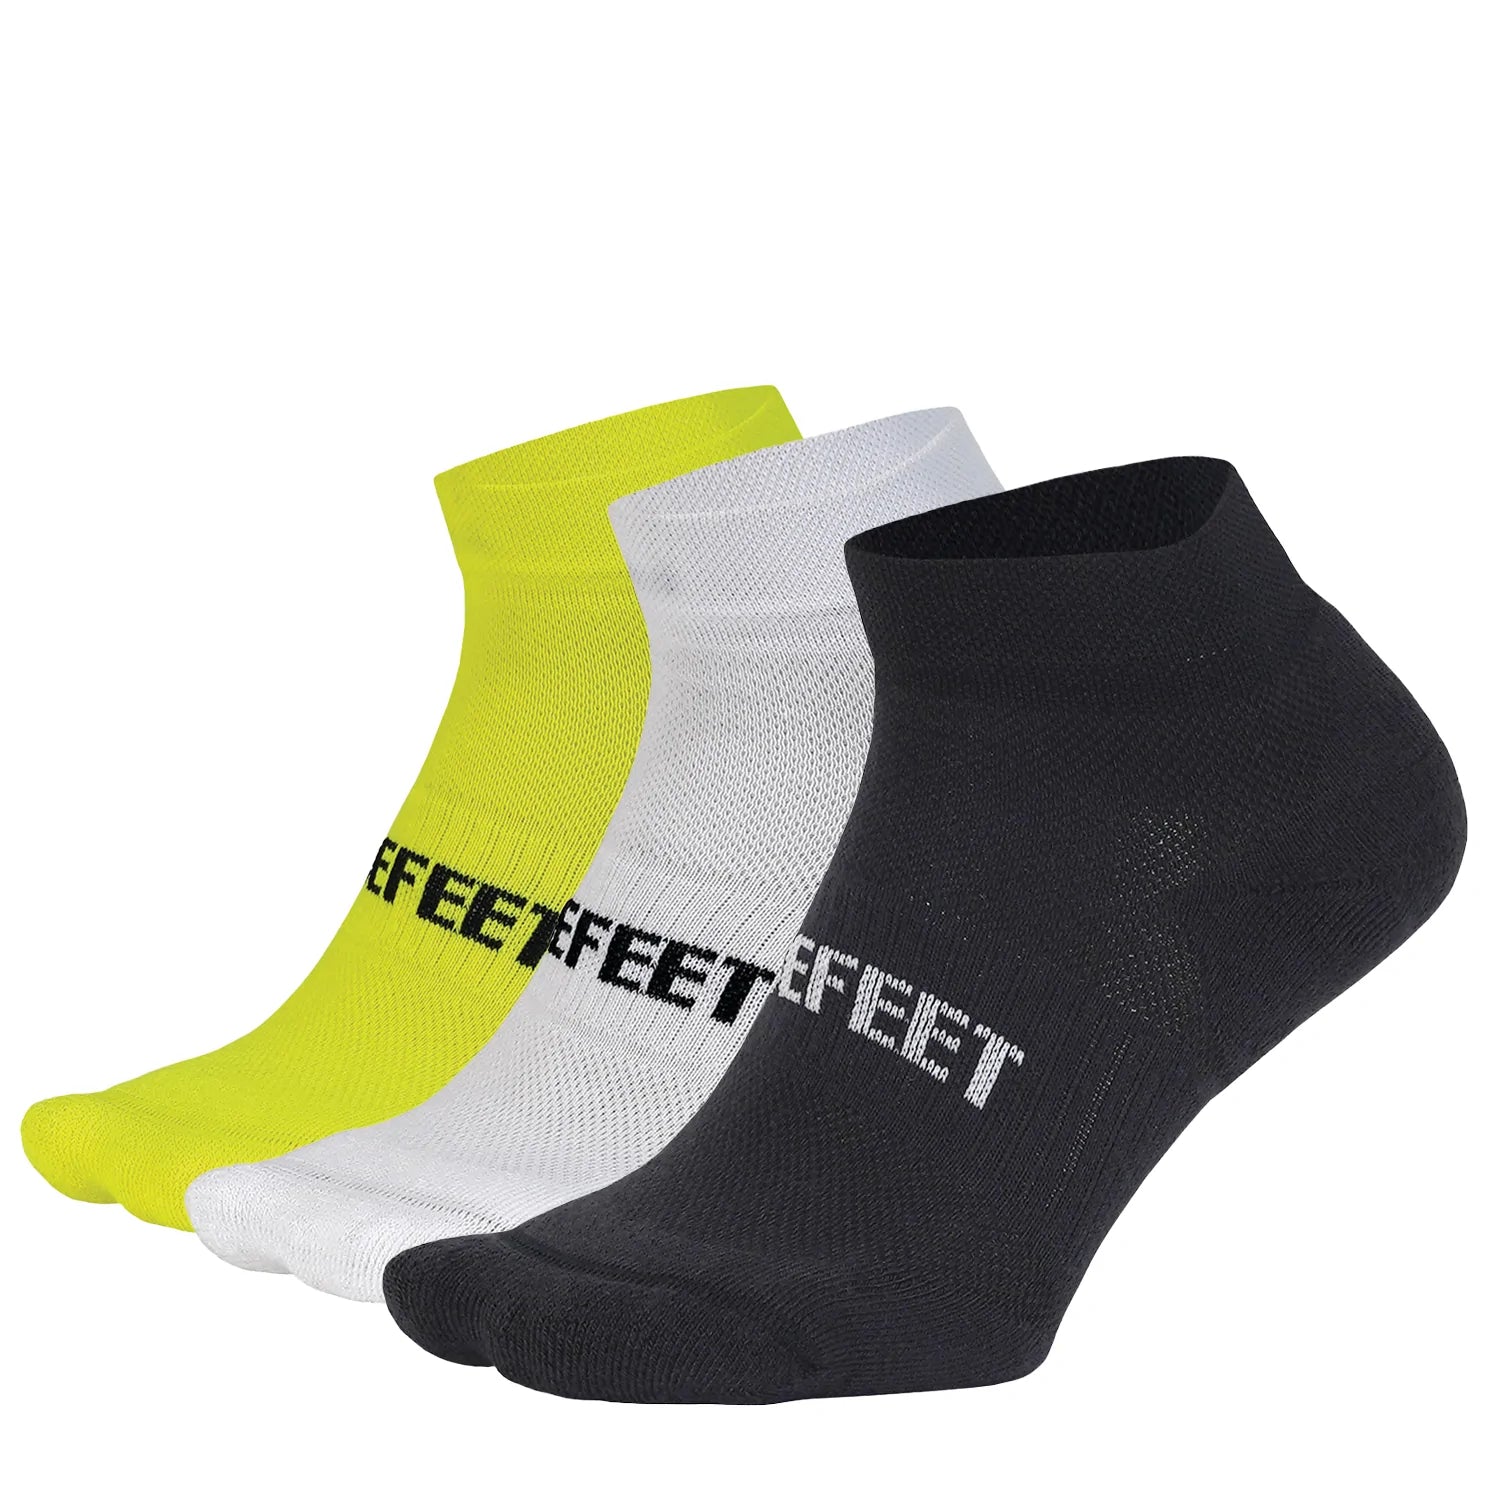 three socks with 1" short low cuffs in black, white, and hi-vis yellow